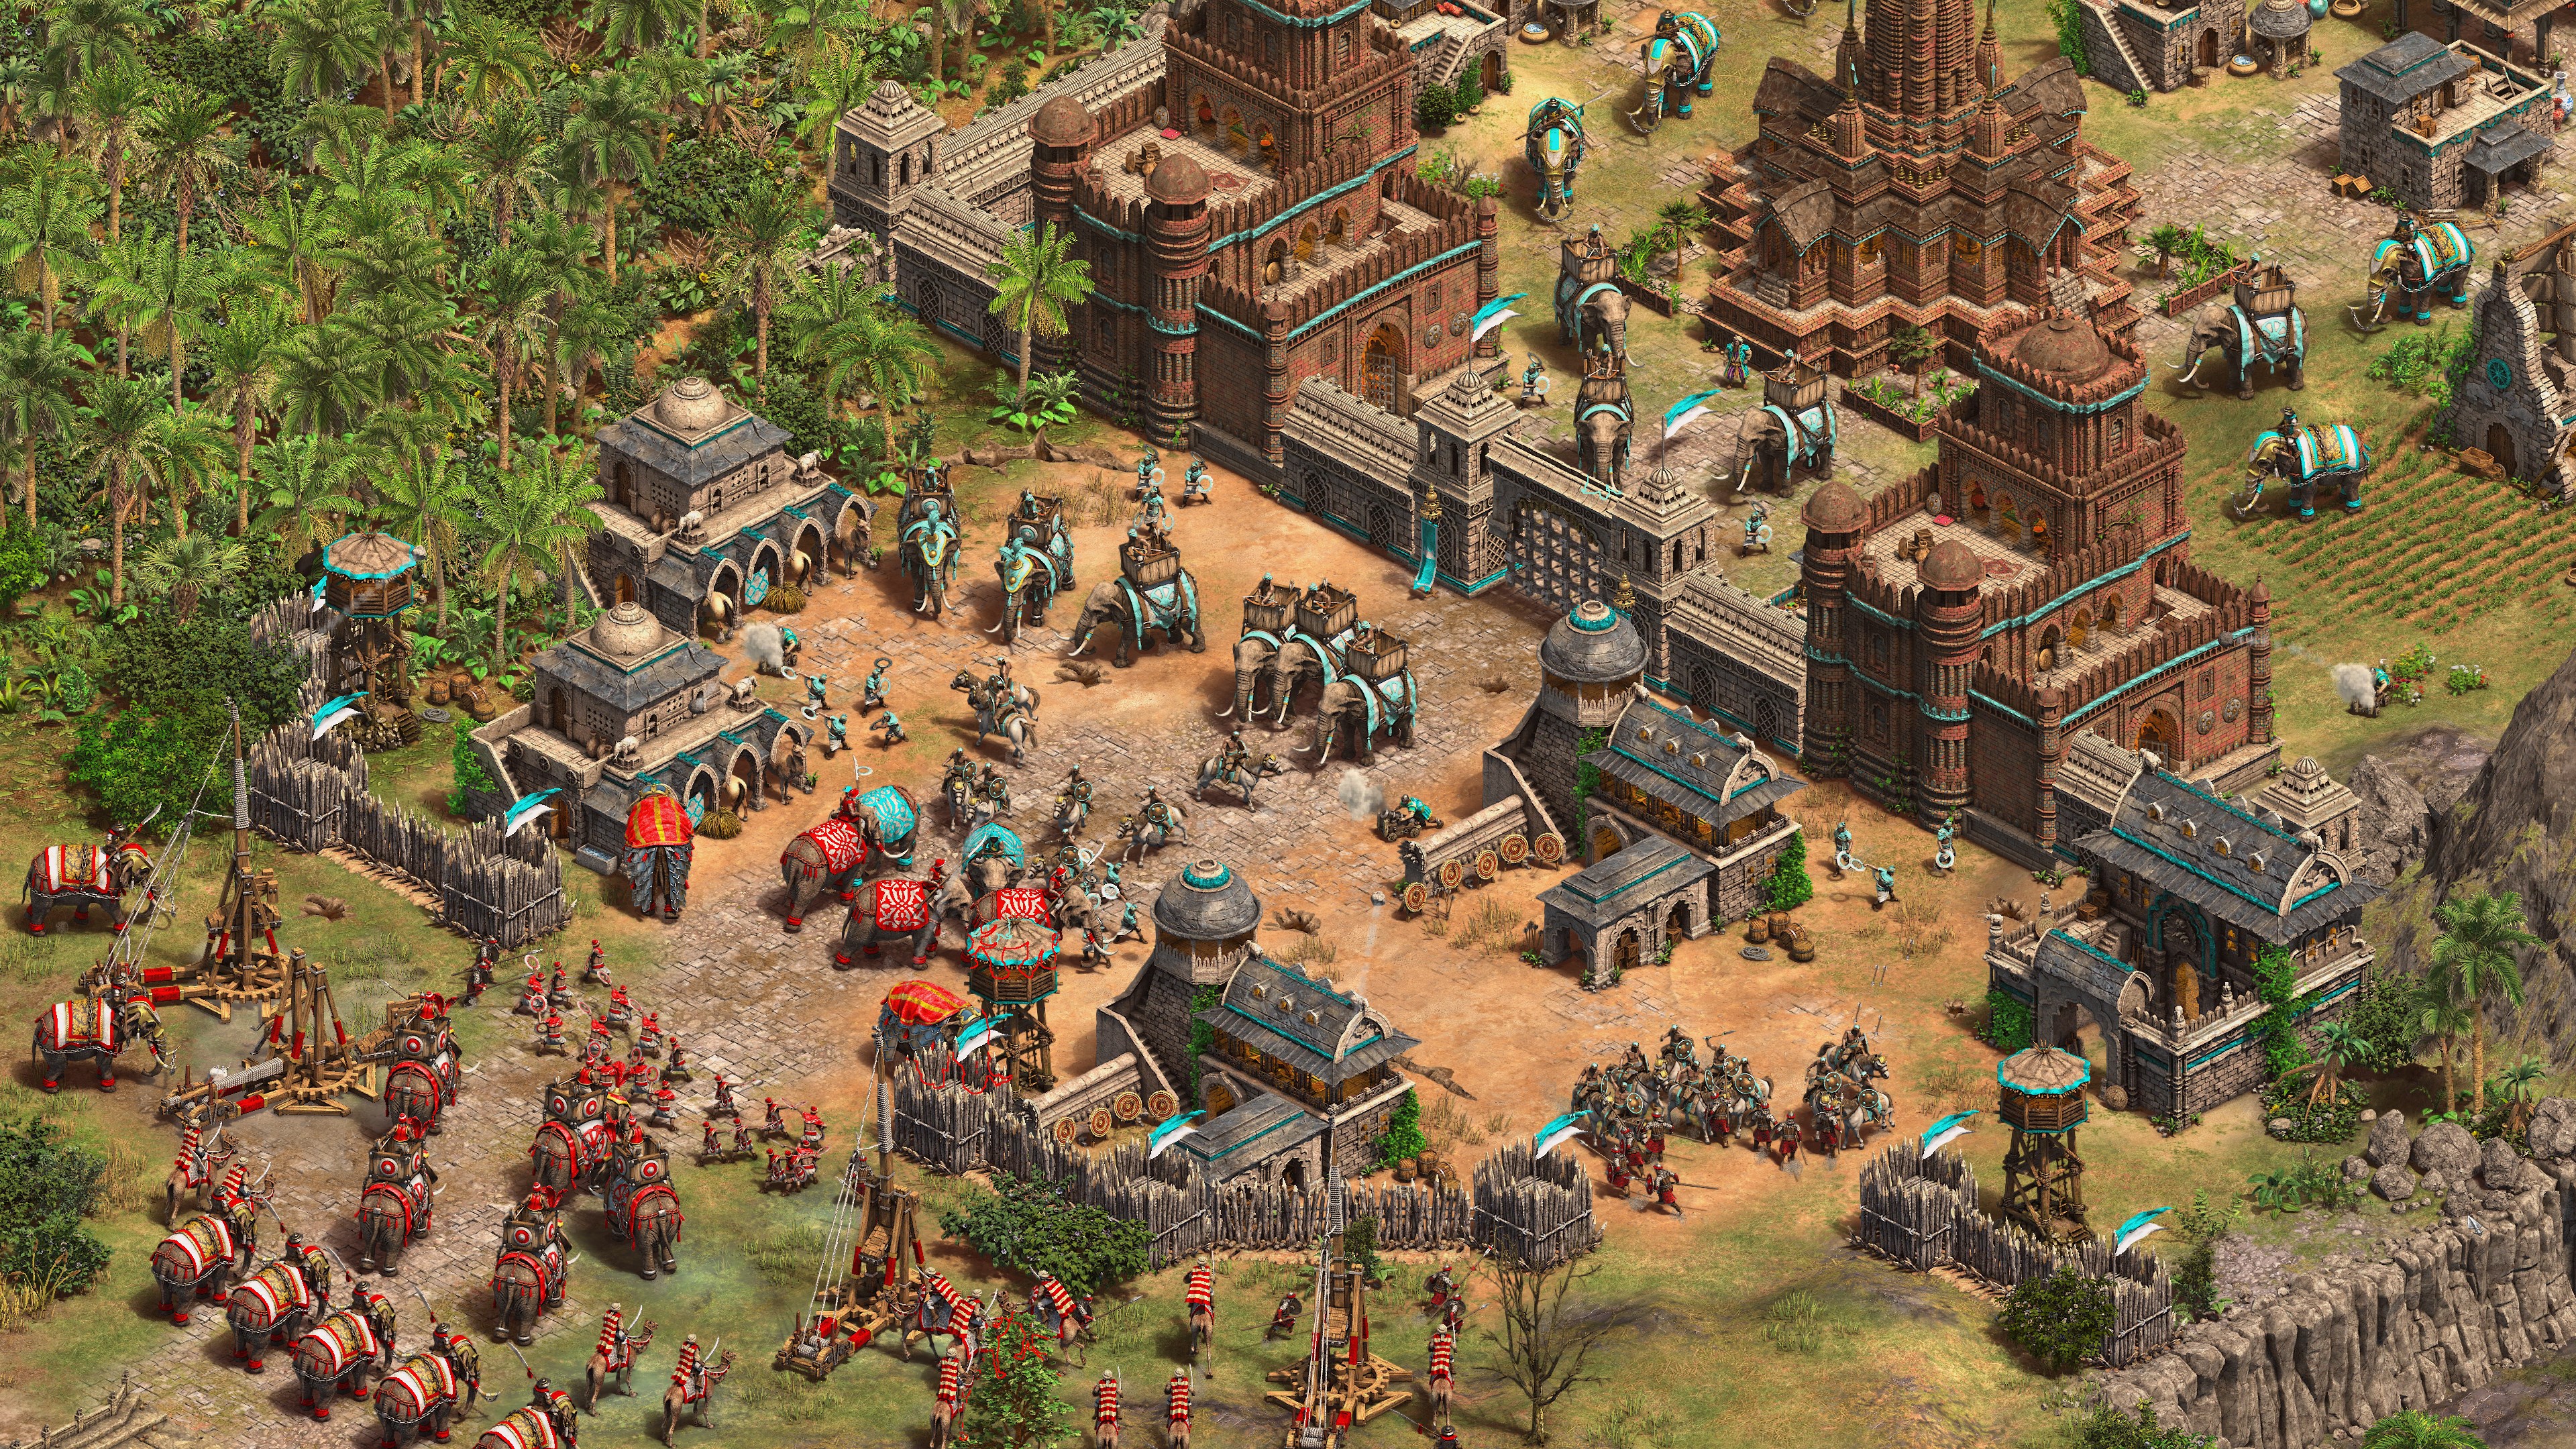 Age of Empires II: Definitive Edition - Dynasties of India screenshot 52476